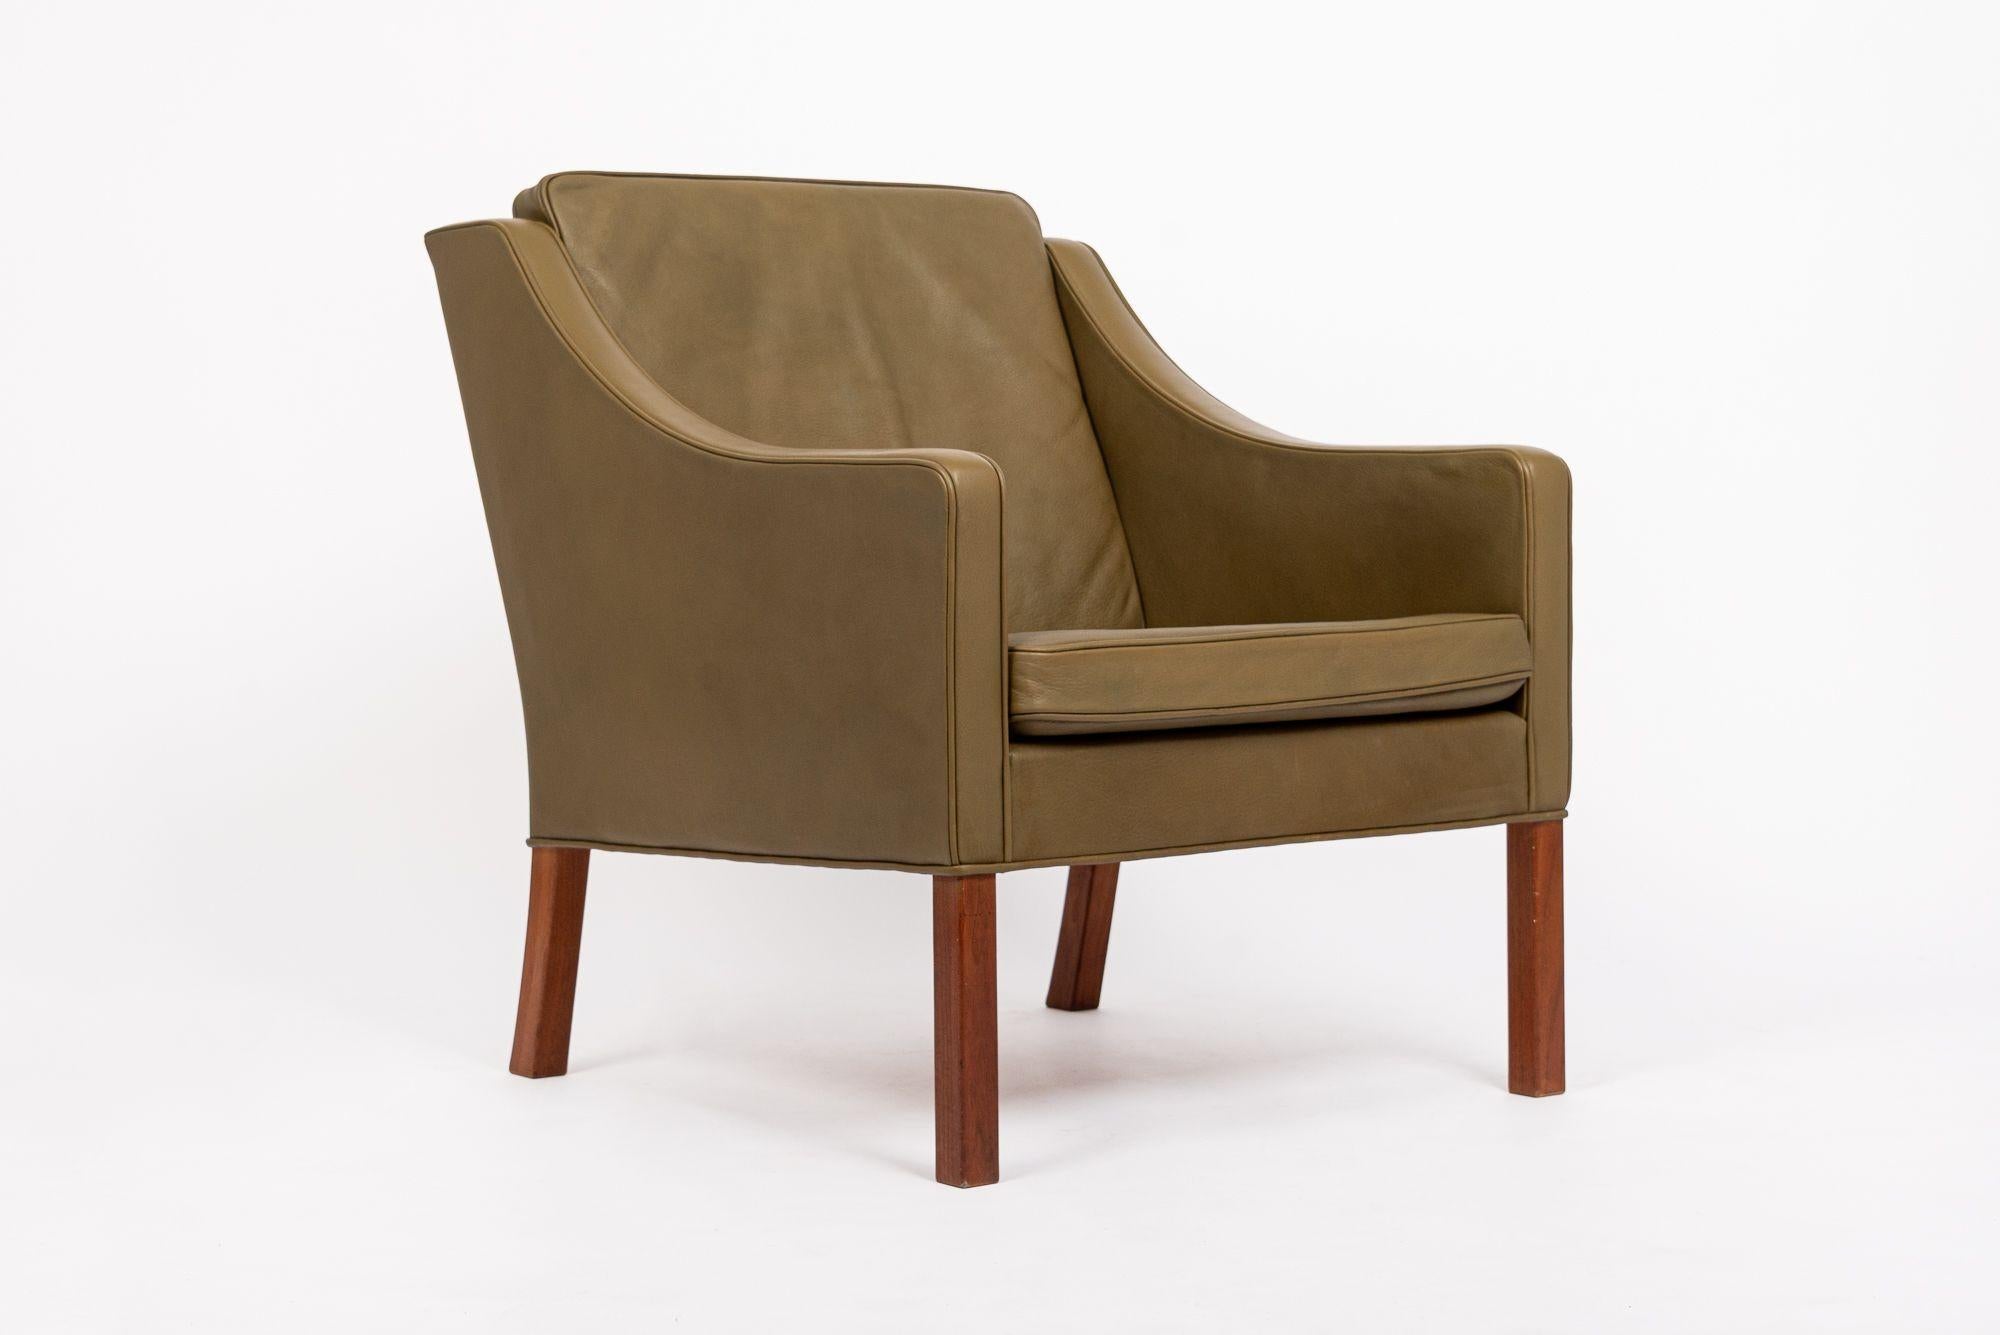 This vintage mid century Danish modern Model 2207 green club chair was designed by Børge Mogensen in 1963 and made in Denmark by Fredericia. This Mogensen lounge chair has a classic Danish modern design with clean, minimalist lines and features a